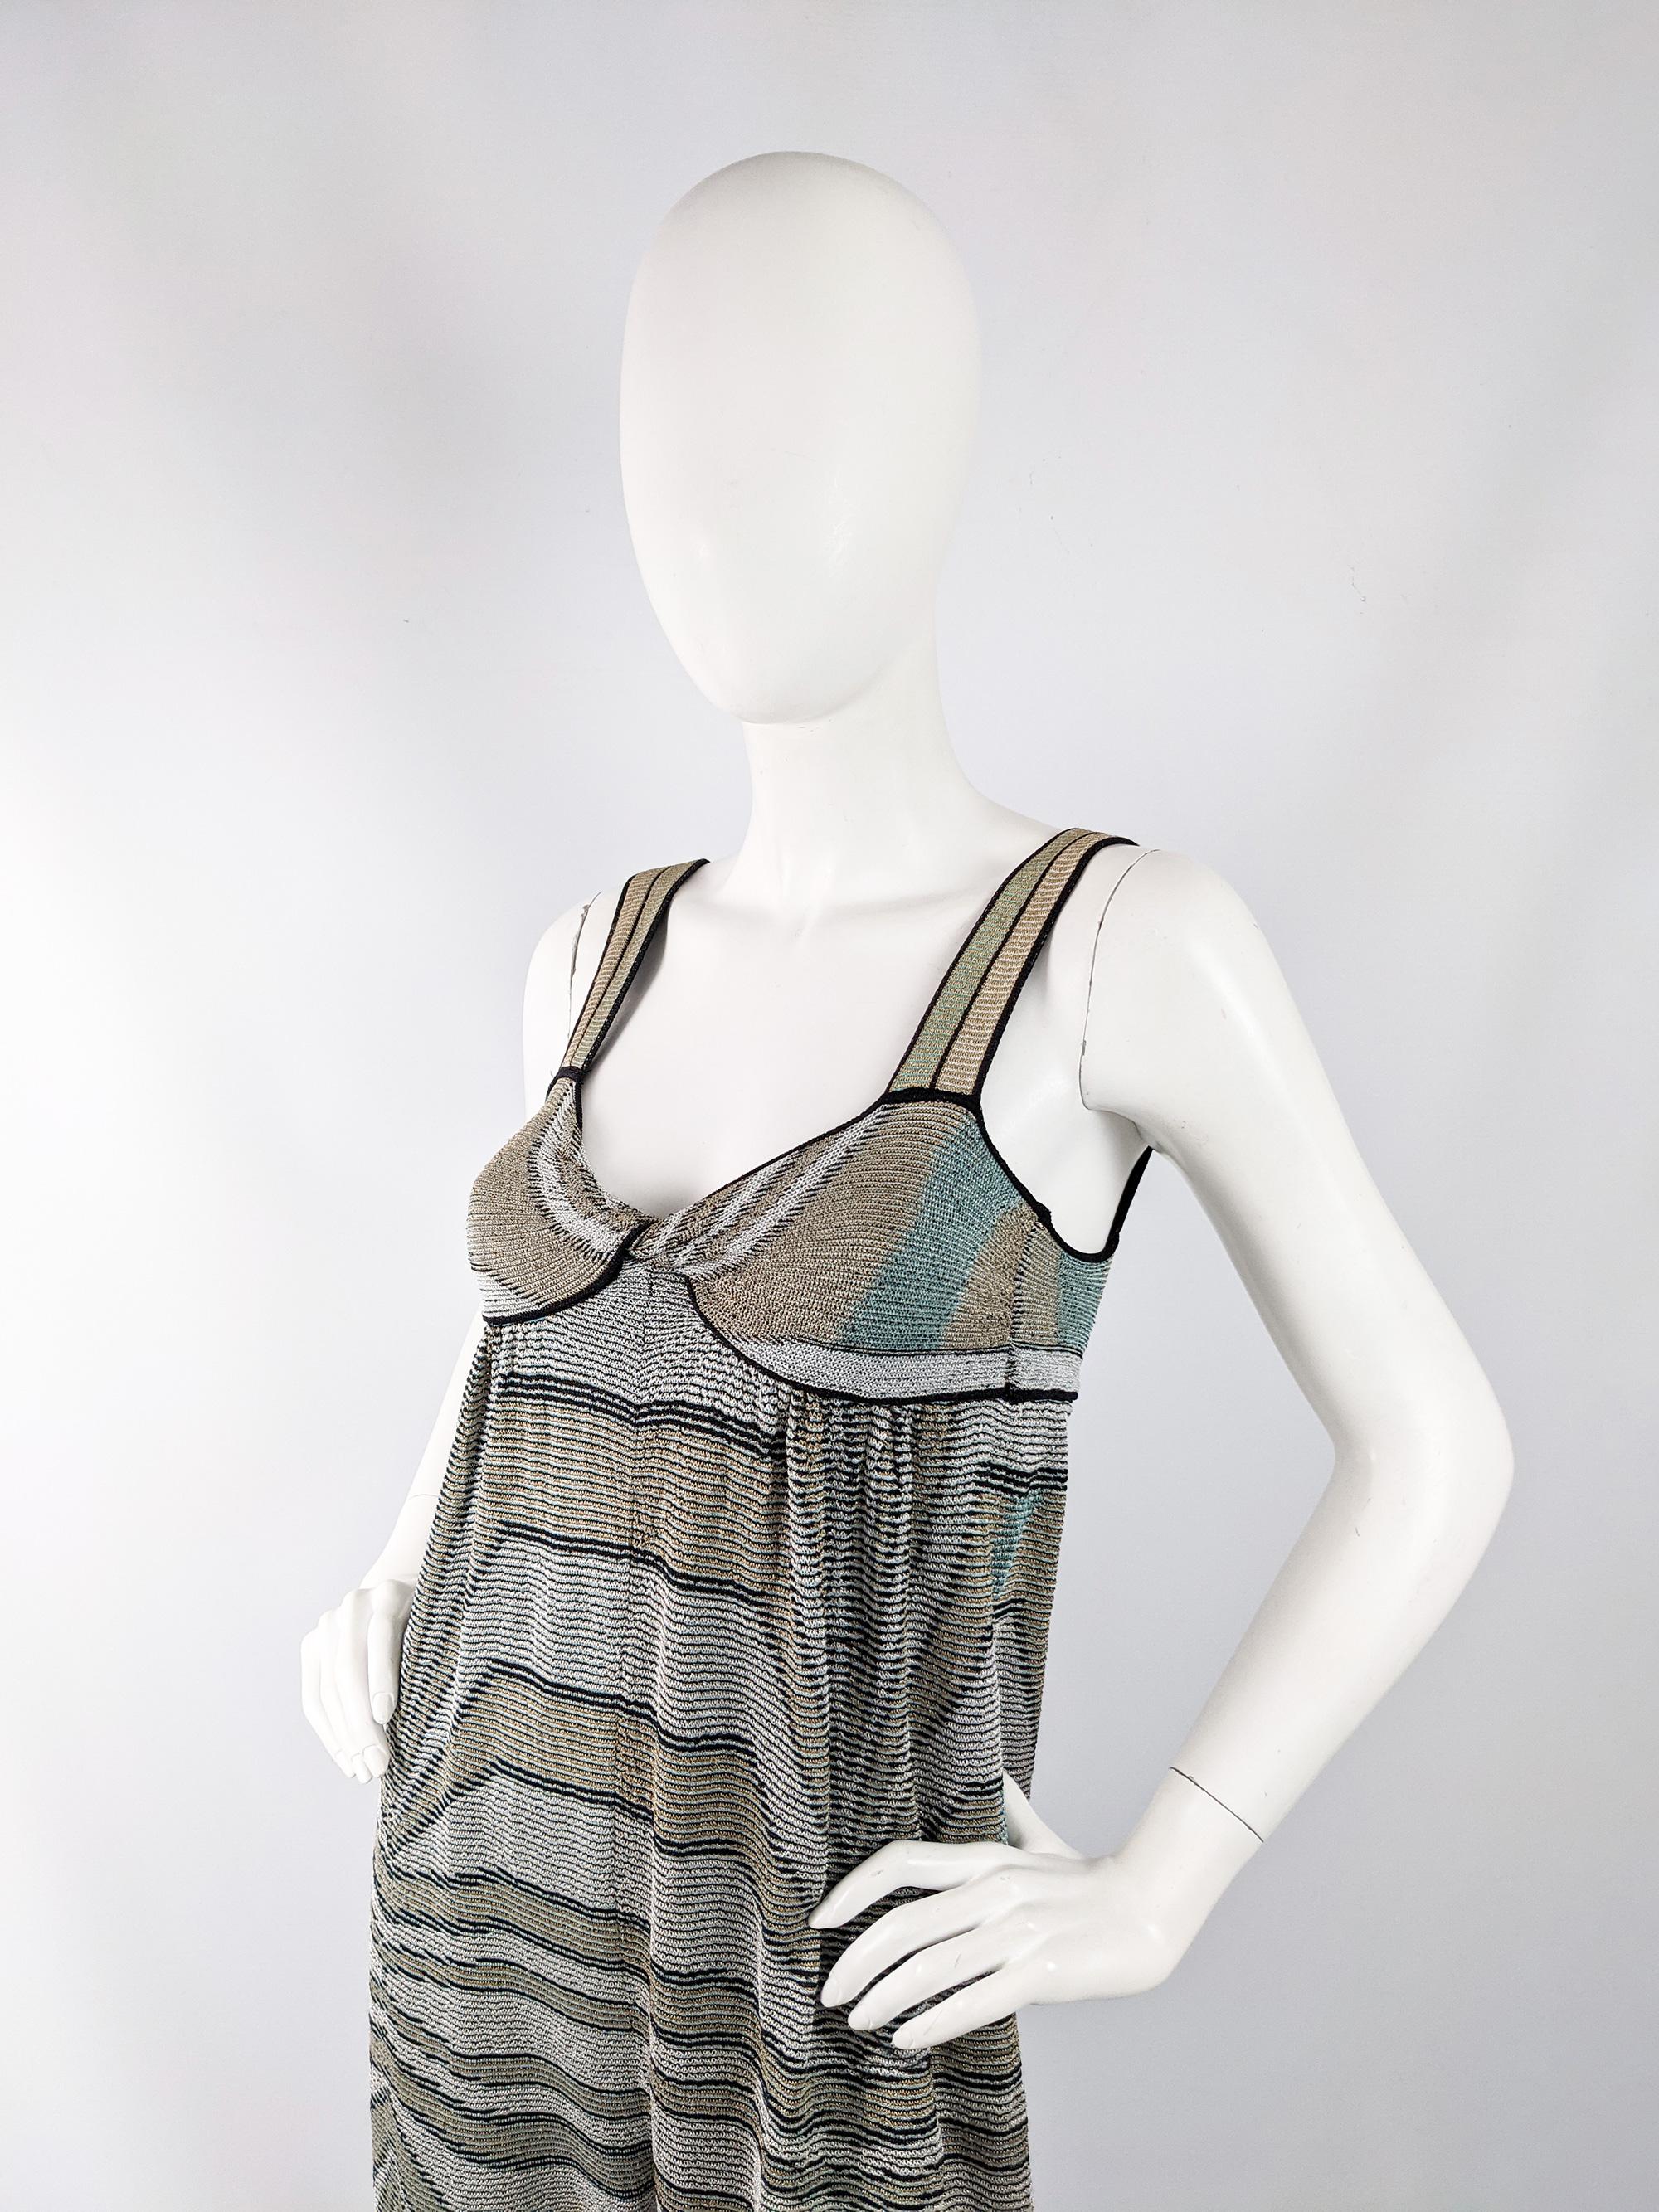 M Missoni Womens Sleeveless Lurex Knit Jumpsuit In Good Condition For Sale In Doncaster, South Yorkshire